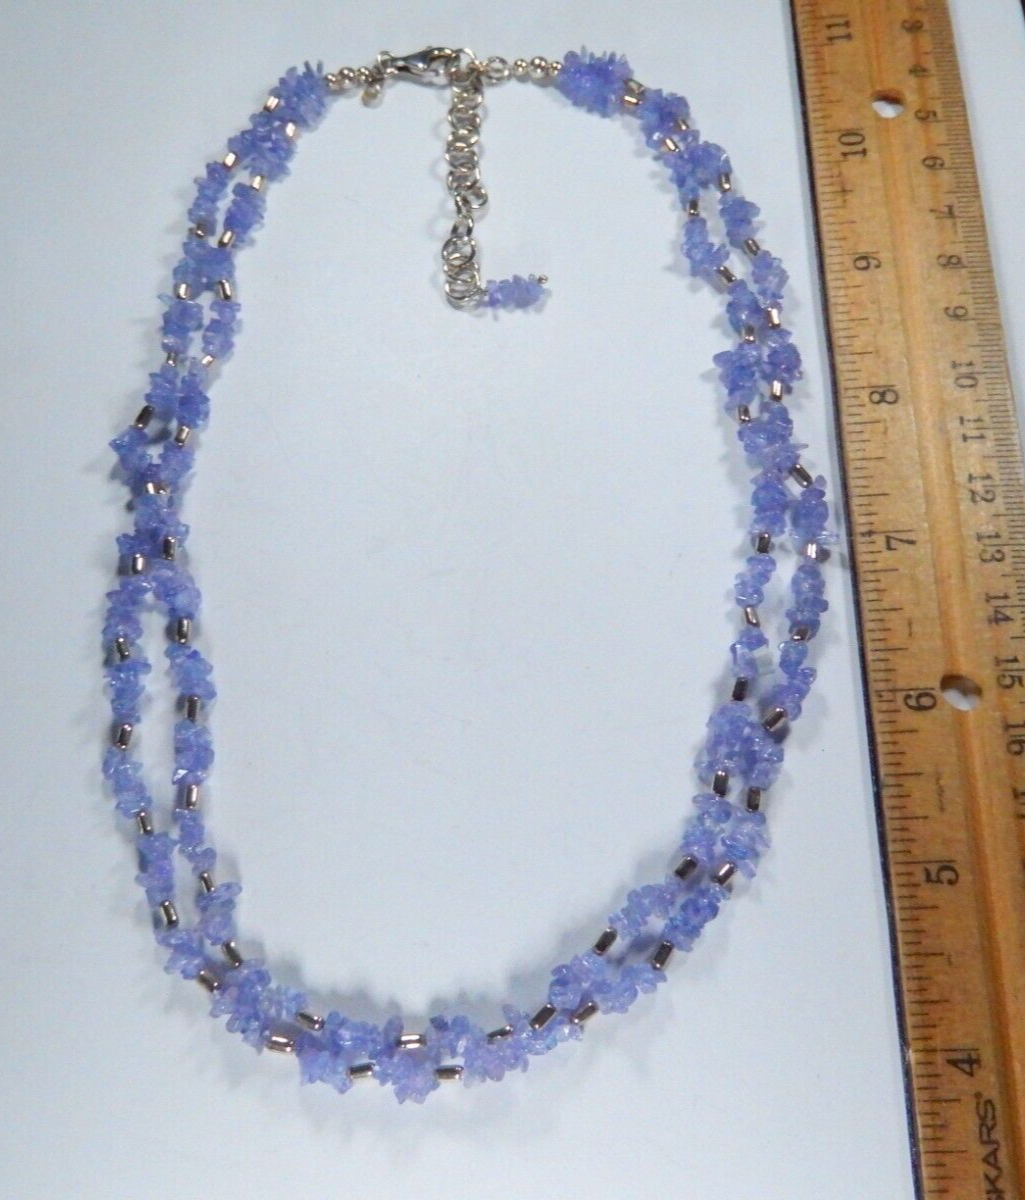 *VINTAGE" Amethyst Chip Bead & Sterling Silver 925 Bead 2 Strand Necklace 18-20"